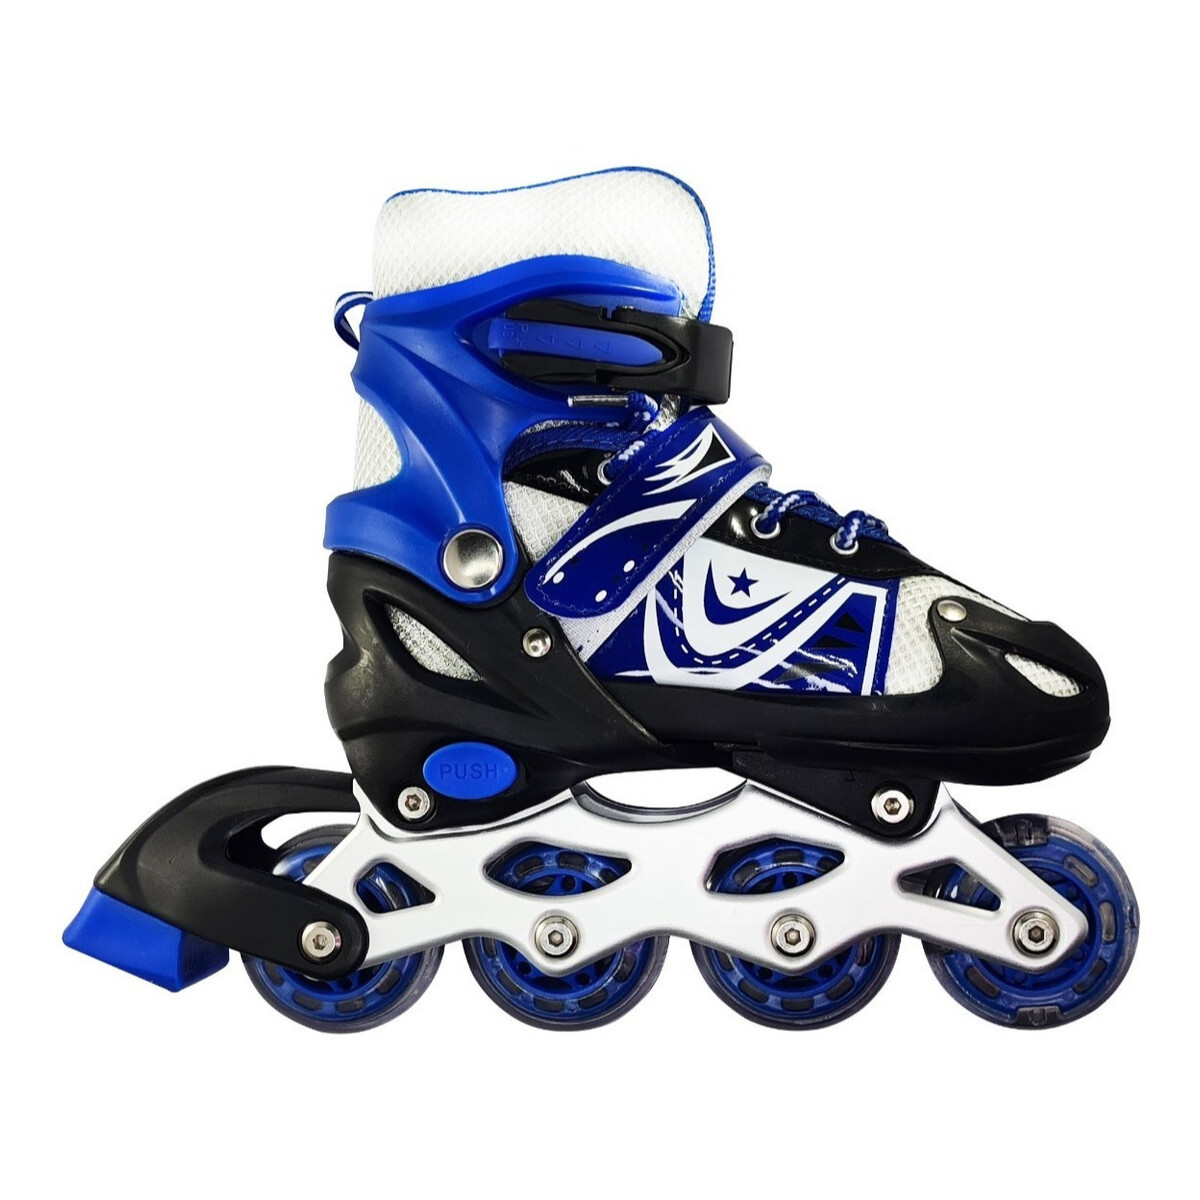 Patines Rollers Extensibles Calidad Colores Infantil Niños - Variante Color Azul Talle 39-42 